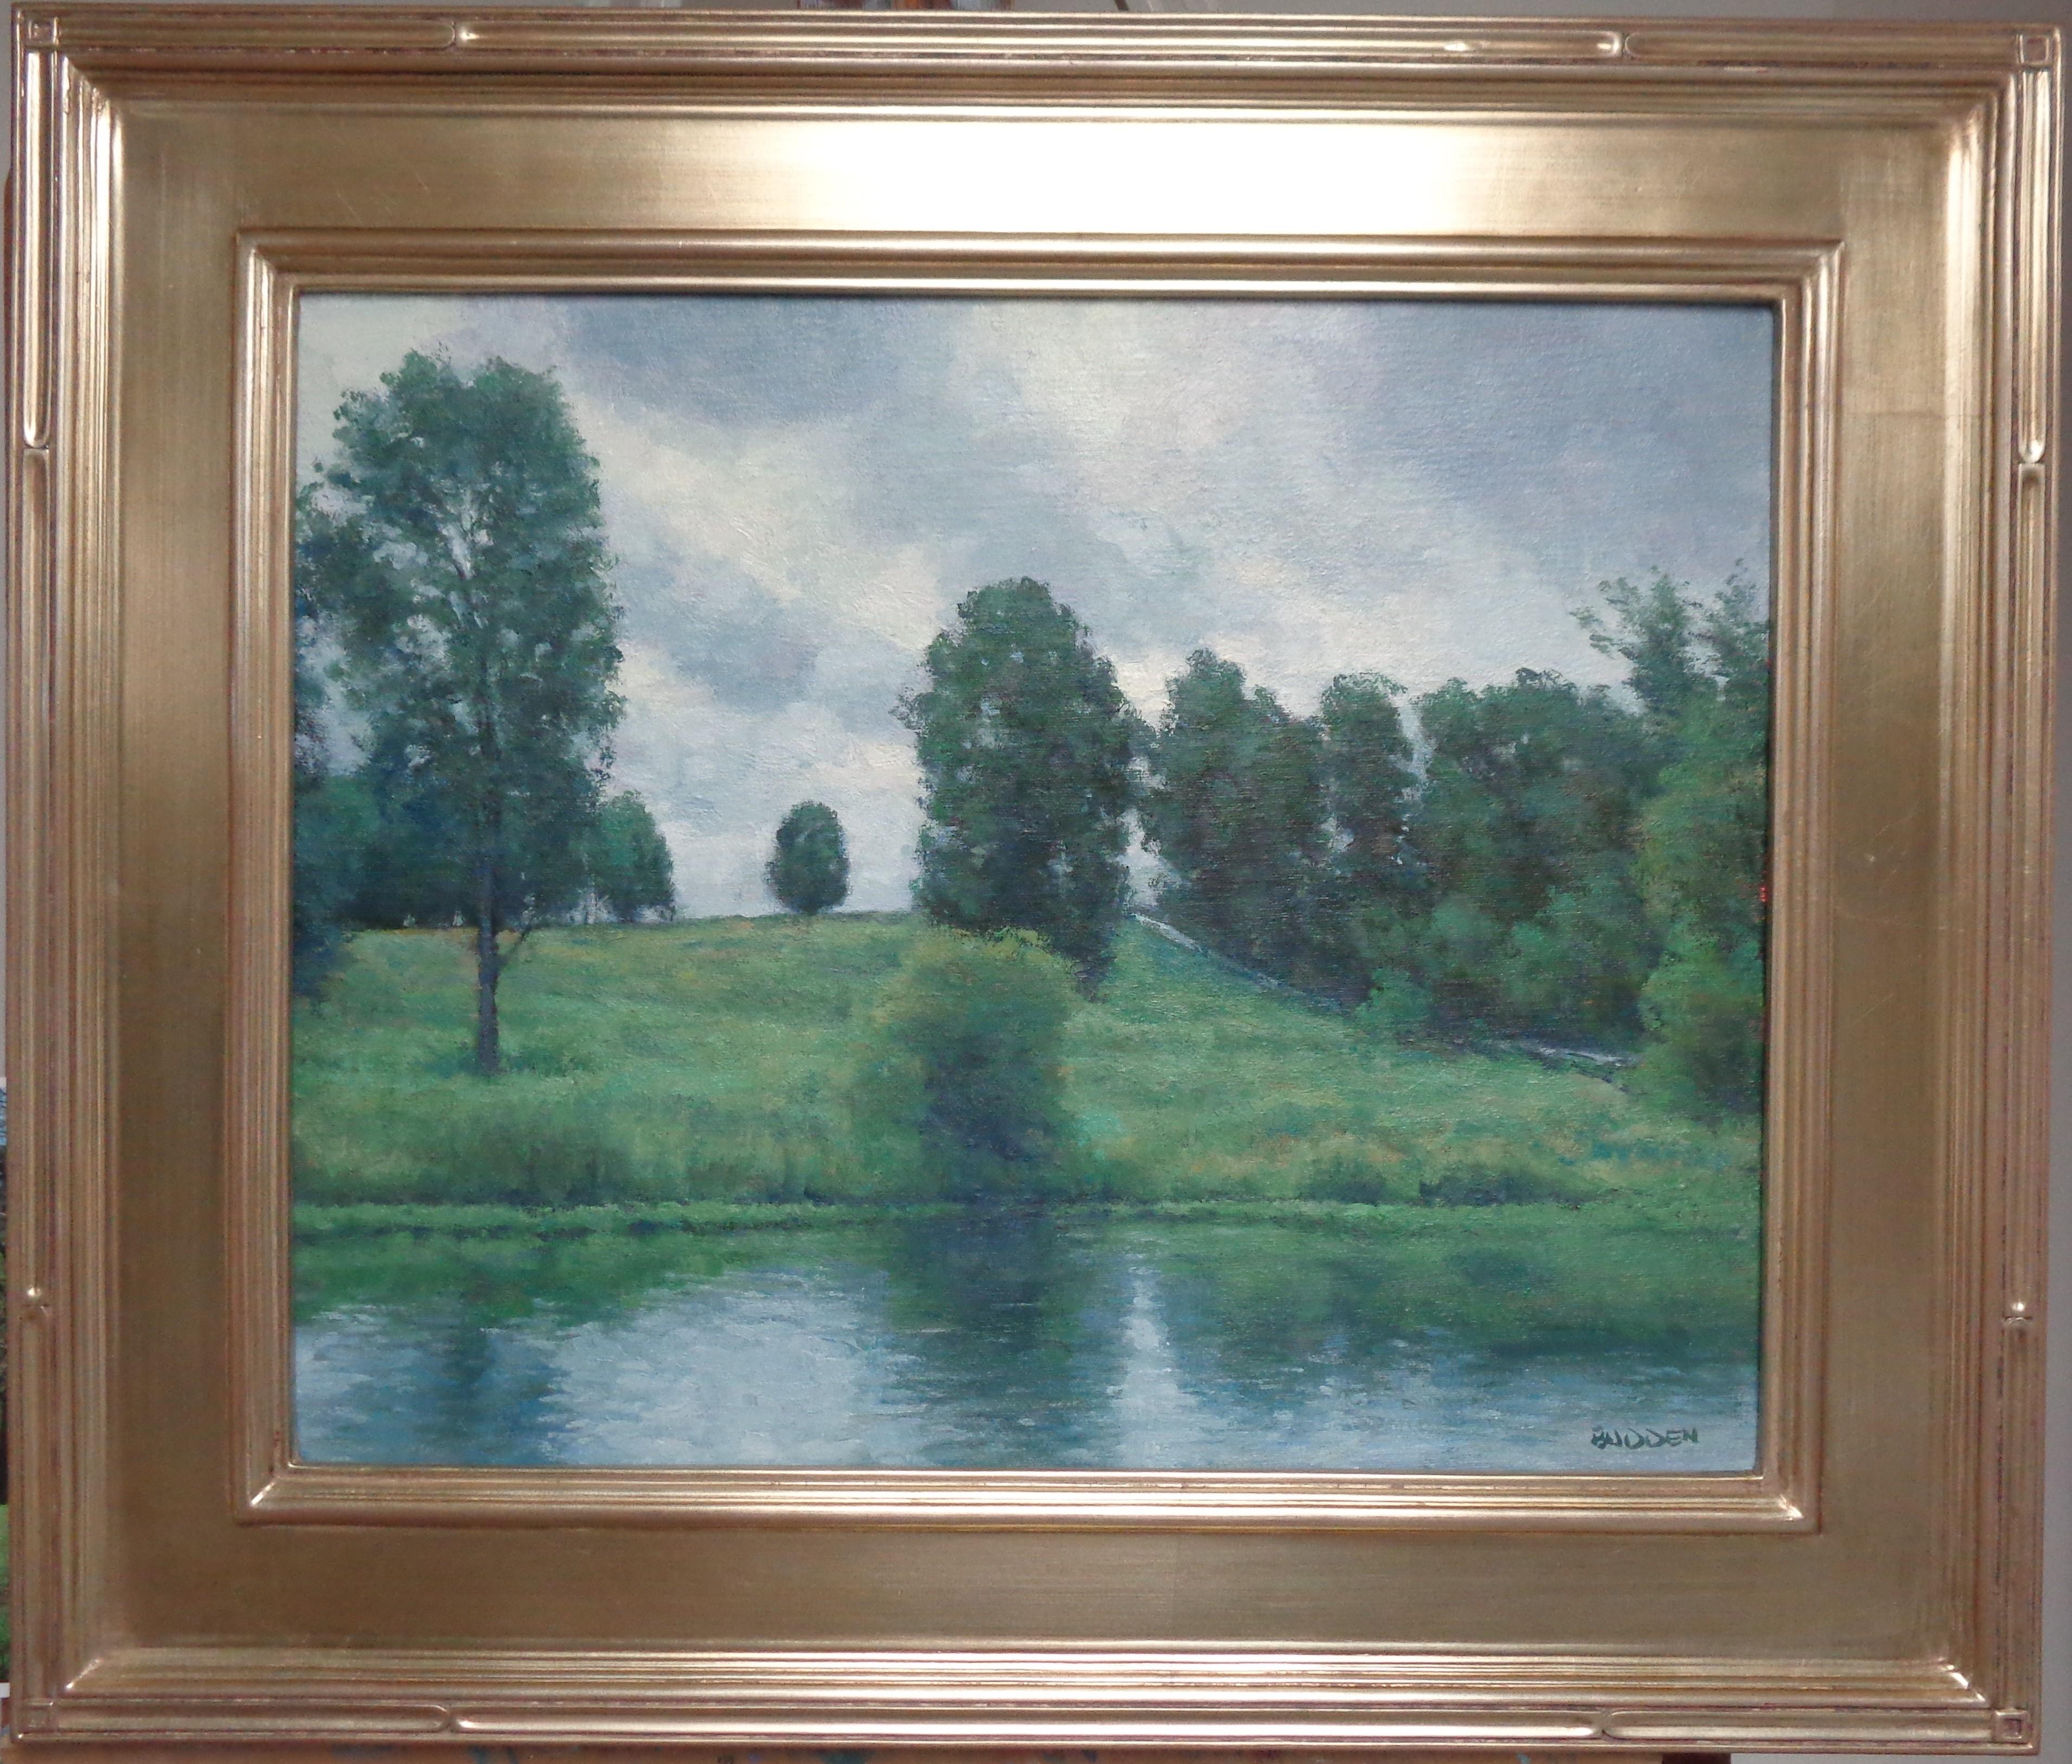 Fishing Hole
oil/canvas
image 16 x 20 unframed,  is an oil painting on canvas that showcases the beautiful light of a summer day during showers. It showcases my favorite place to fish near my home. Painting is 16 x 20 unframed.

ARTIST'S STATEMENT
I